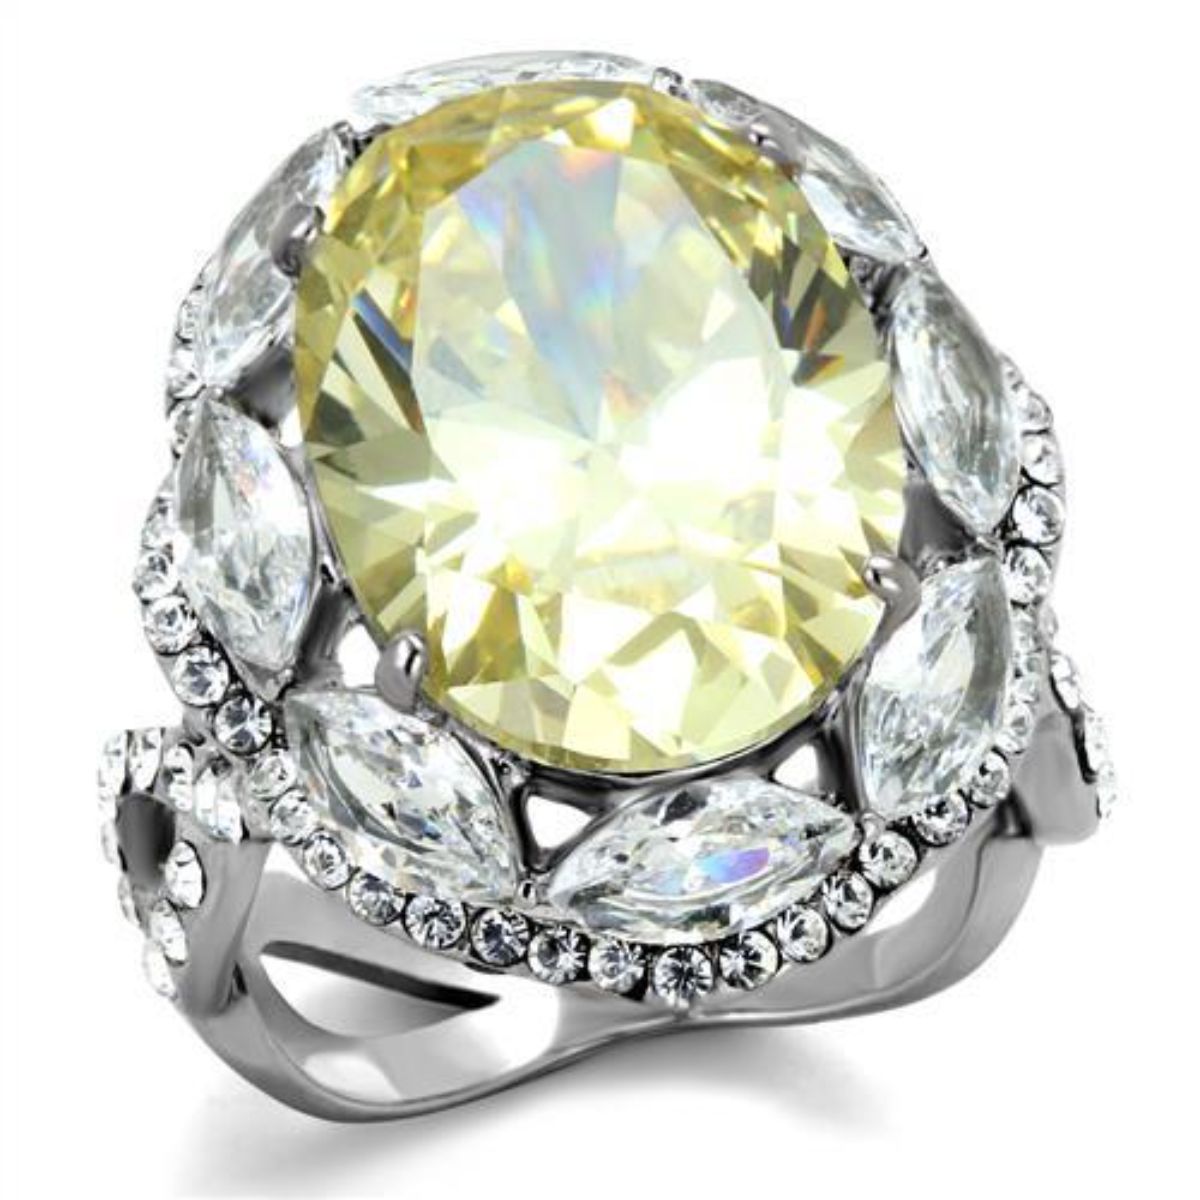 Luxe Jewelry Designs Women's Stainless Steel Ring with Citrine Yellow and Clear CZ Stones - Size 9